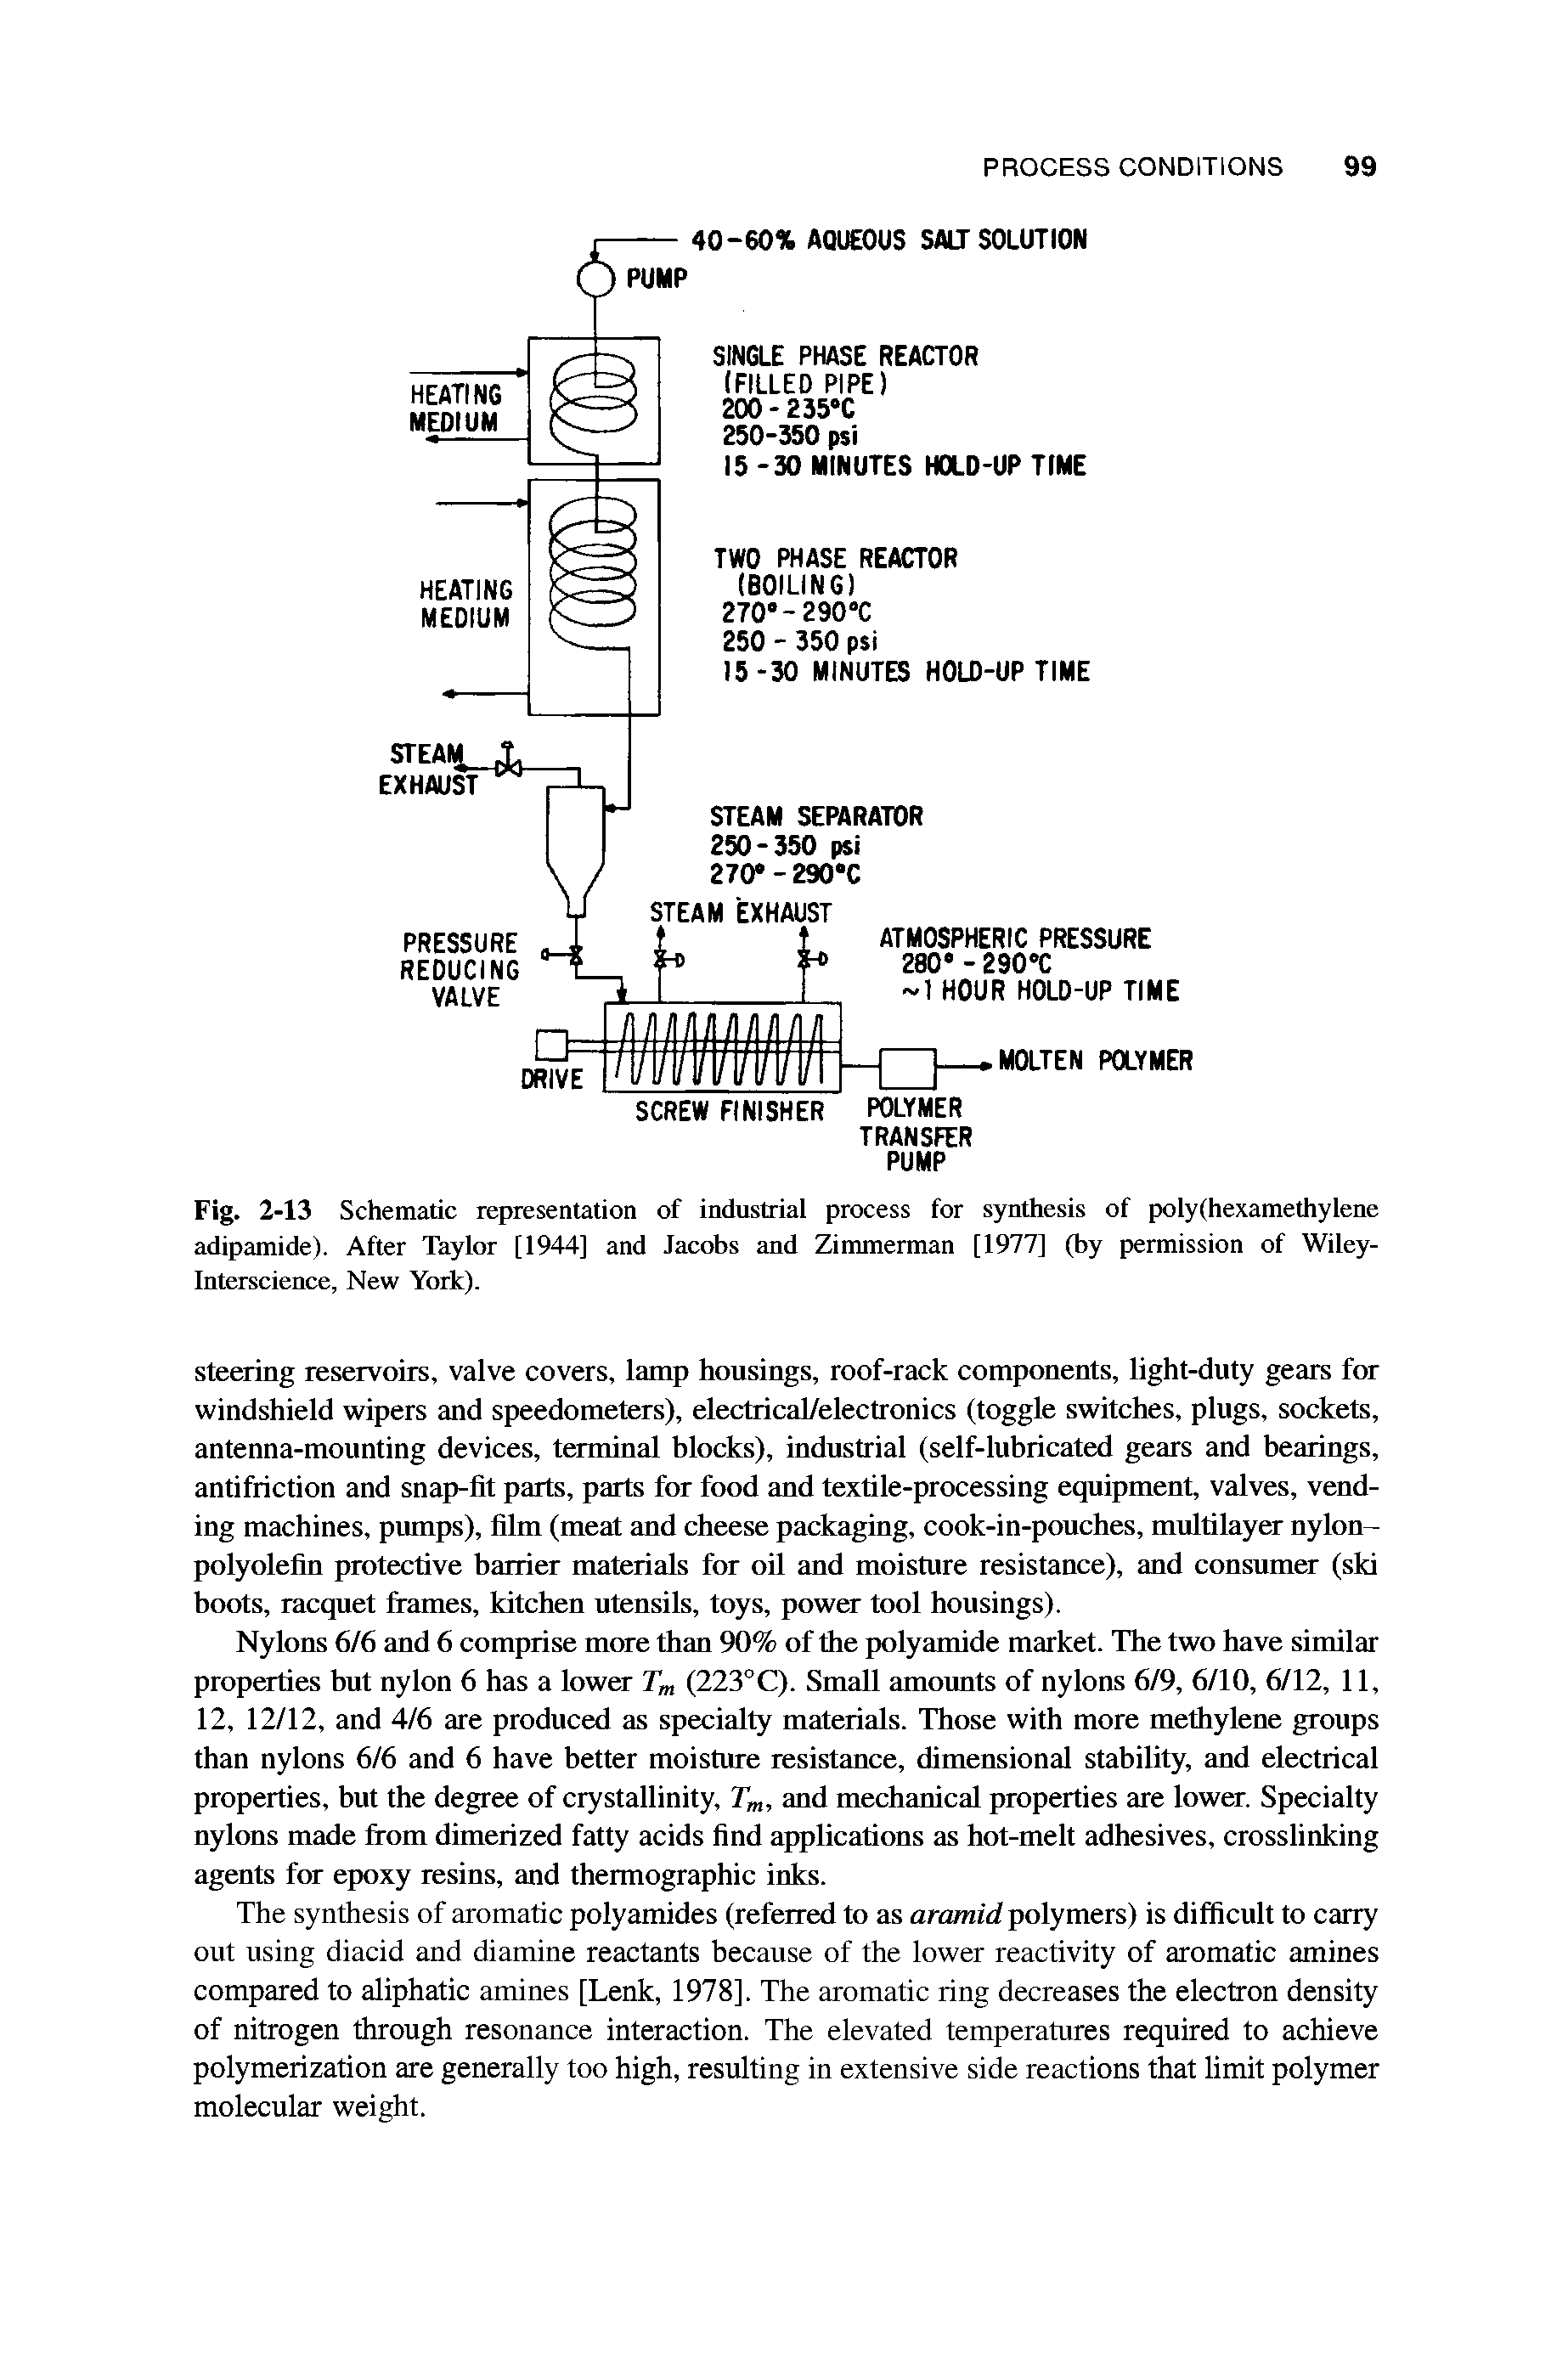 Fig. 2-13 Schematic representation of industrial process for synthesis of poly(hexamethylene adipamide). After Taylor [1944] and Jacobs and Zimmerman [1977] (by permission of Wiley-Interscience, New York).